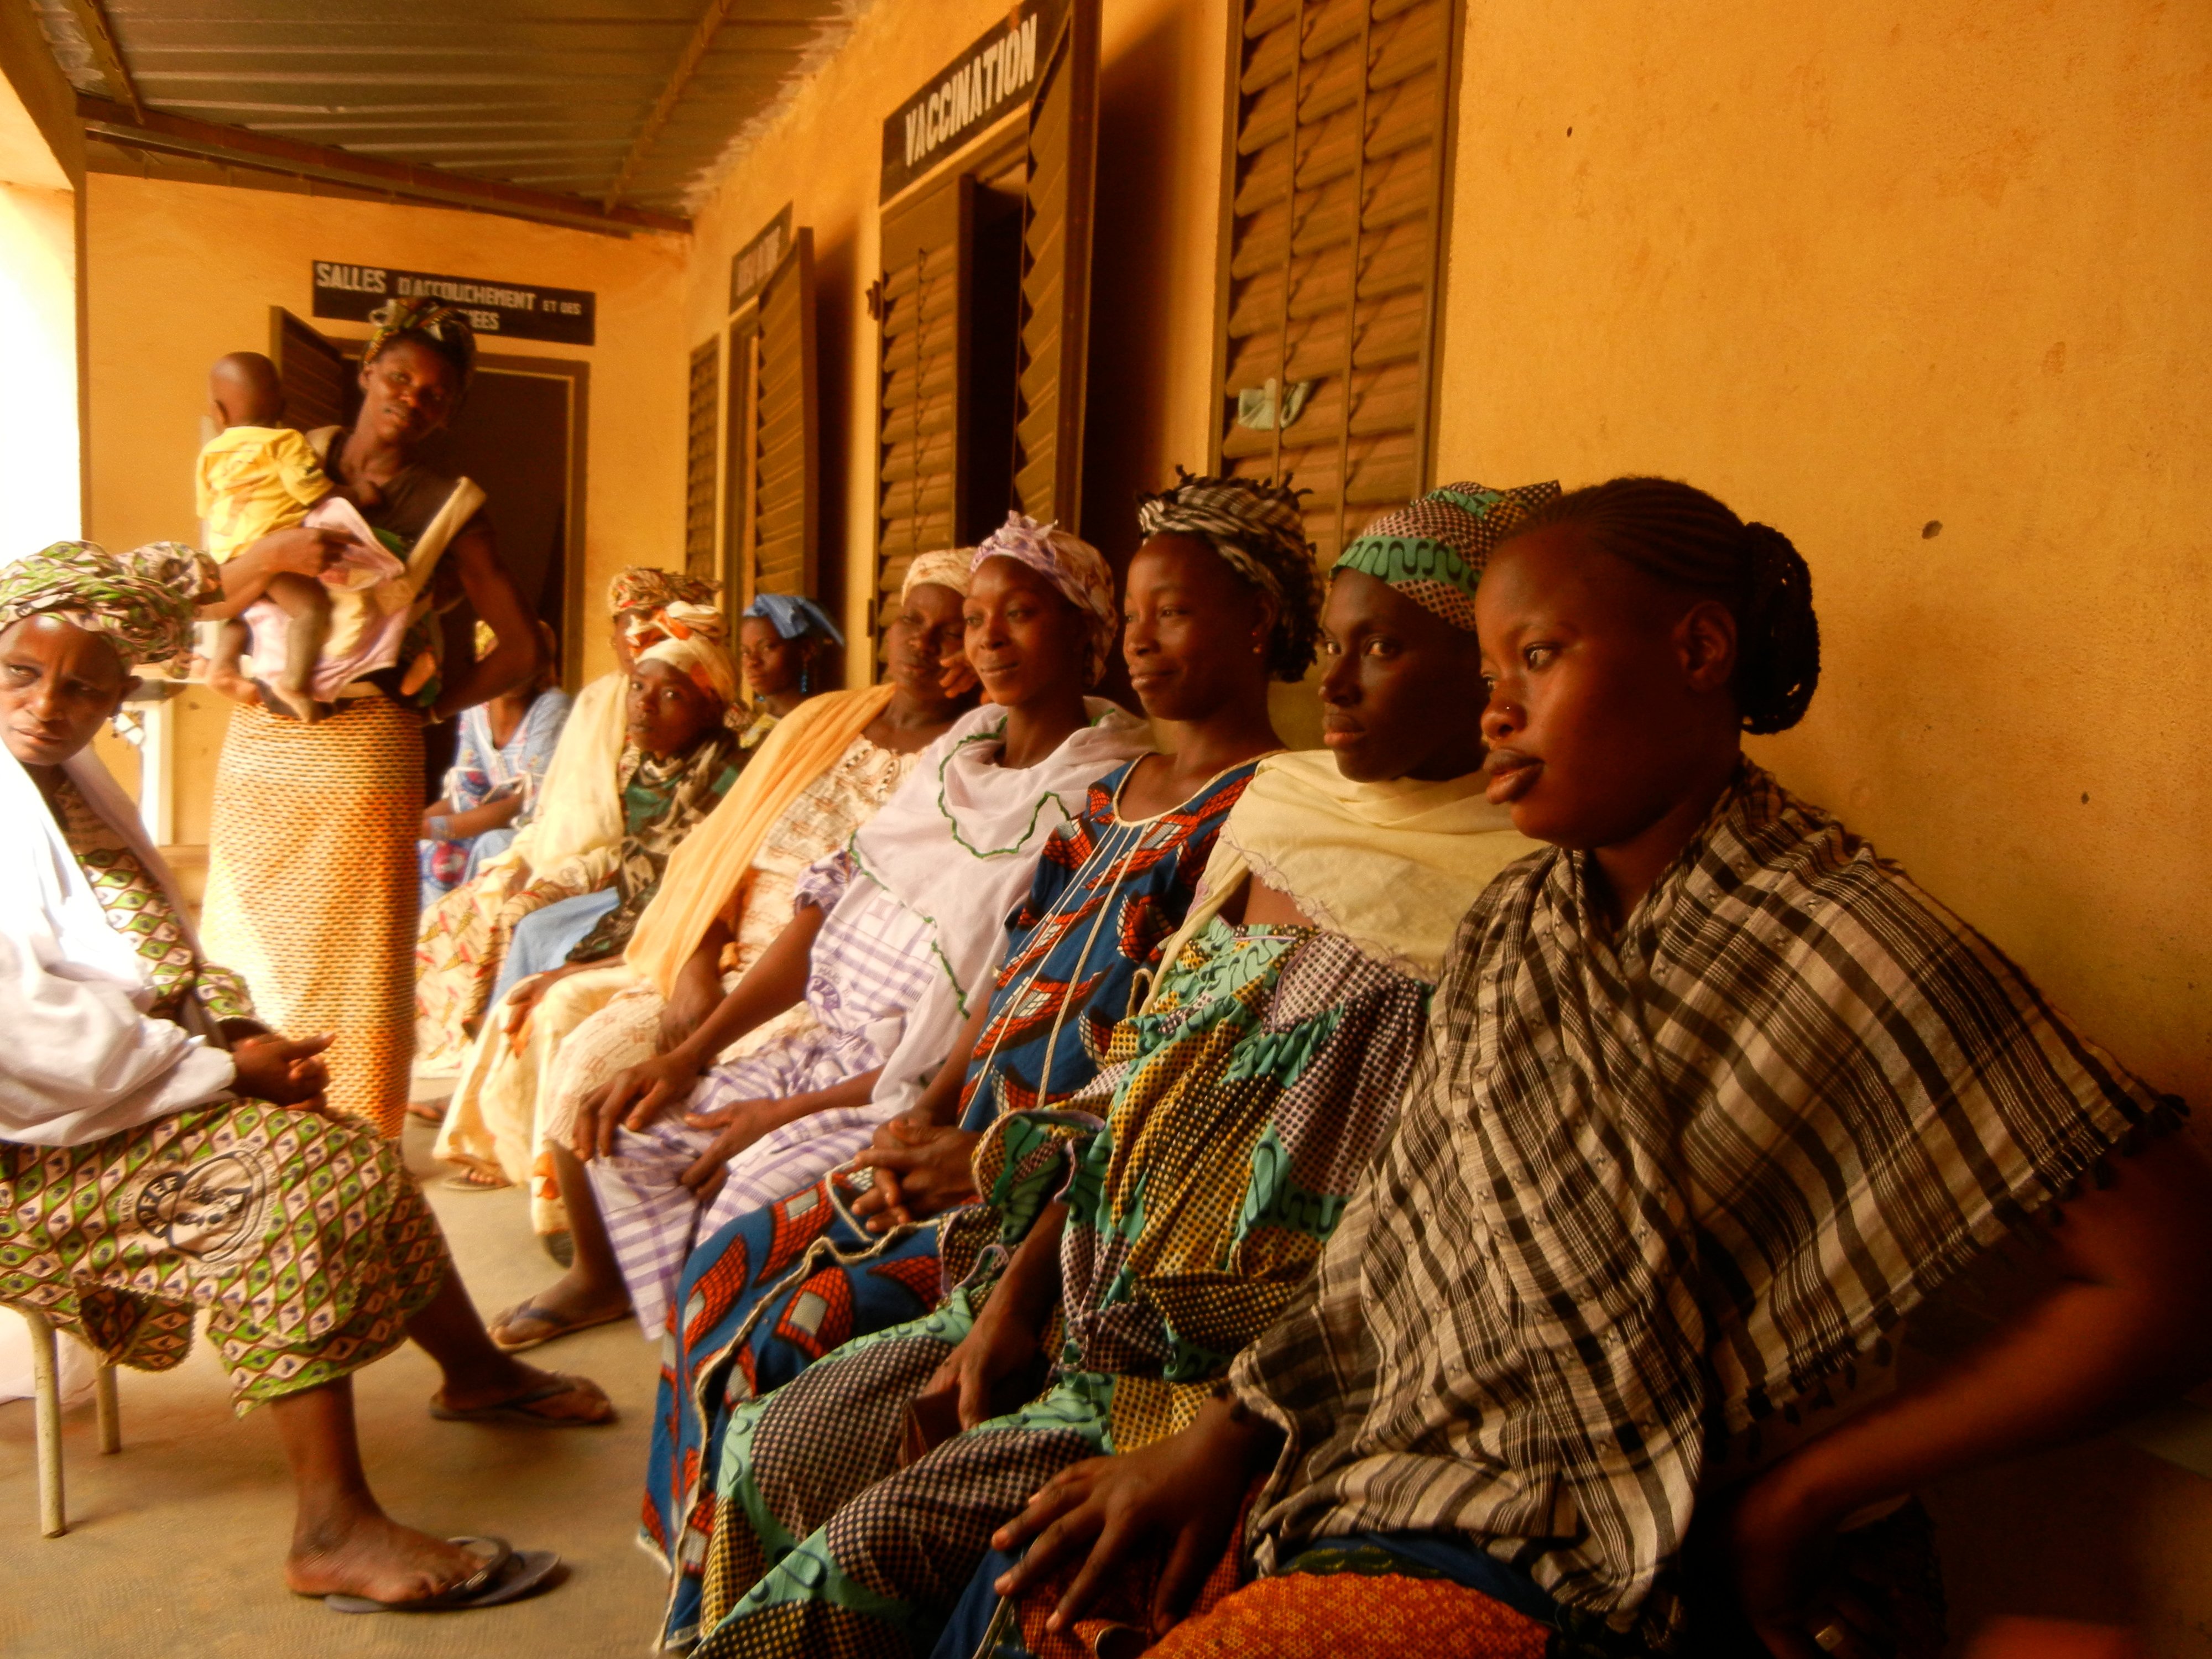 Mali health clinic, pregnant women waiting for midwives, West Africa